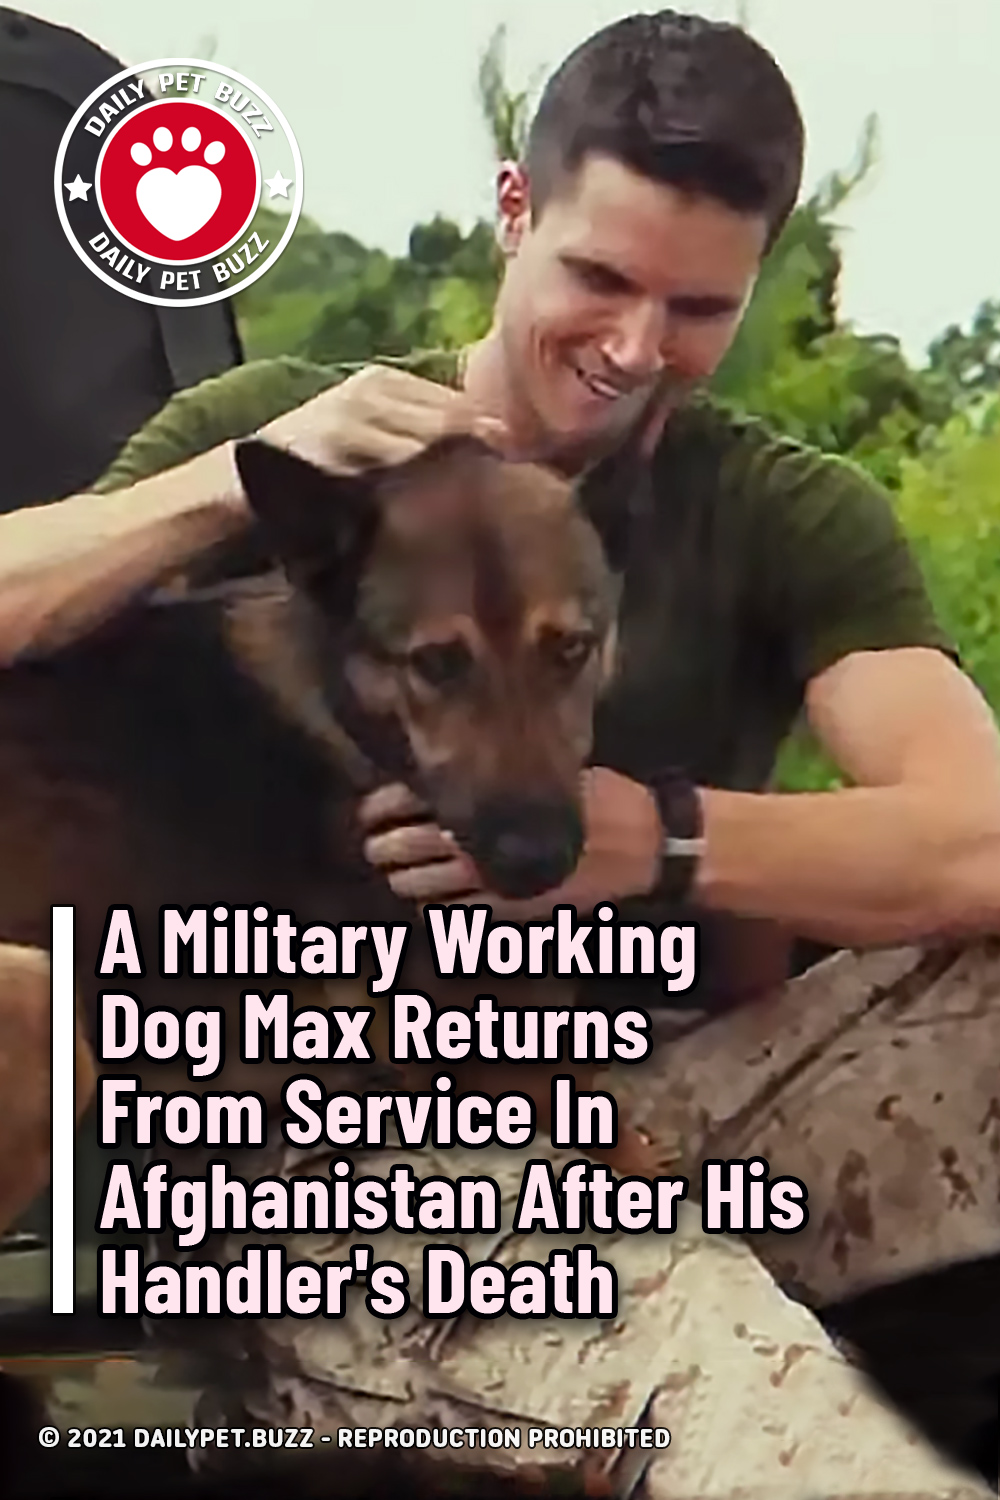 A Military Working Dog Max Returns From Service In Afghanistan After His Handler\'s Death